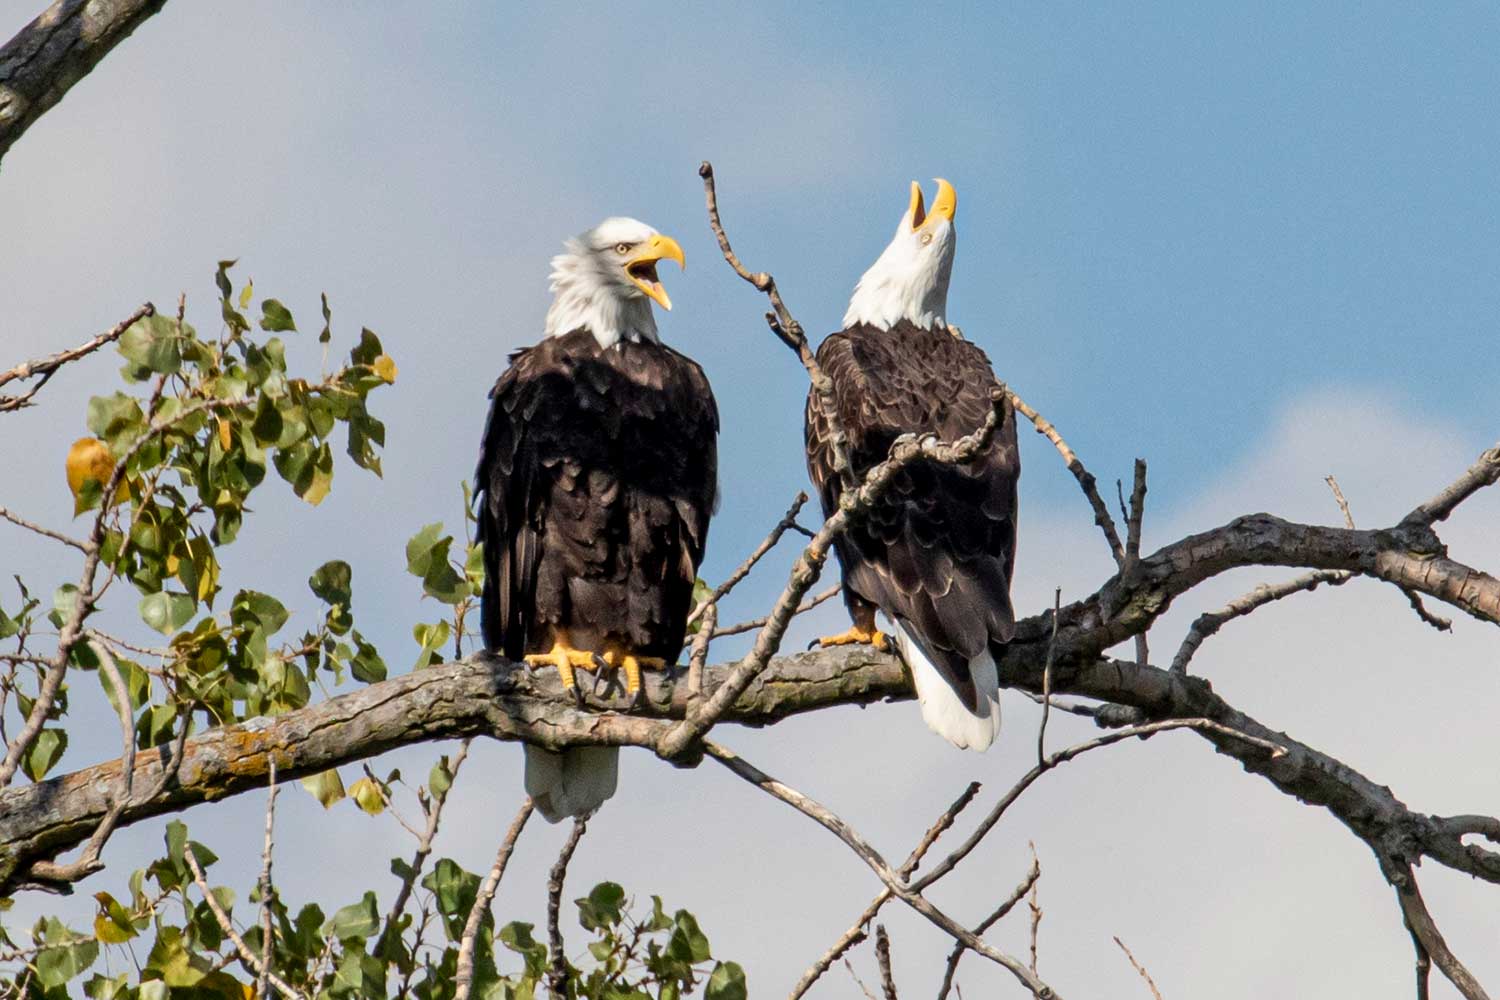 Two adult bald eagles perched on a branch, both with their bills open and one with its head tilted upward.